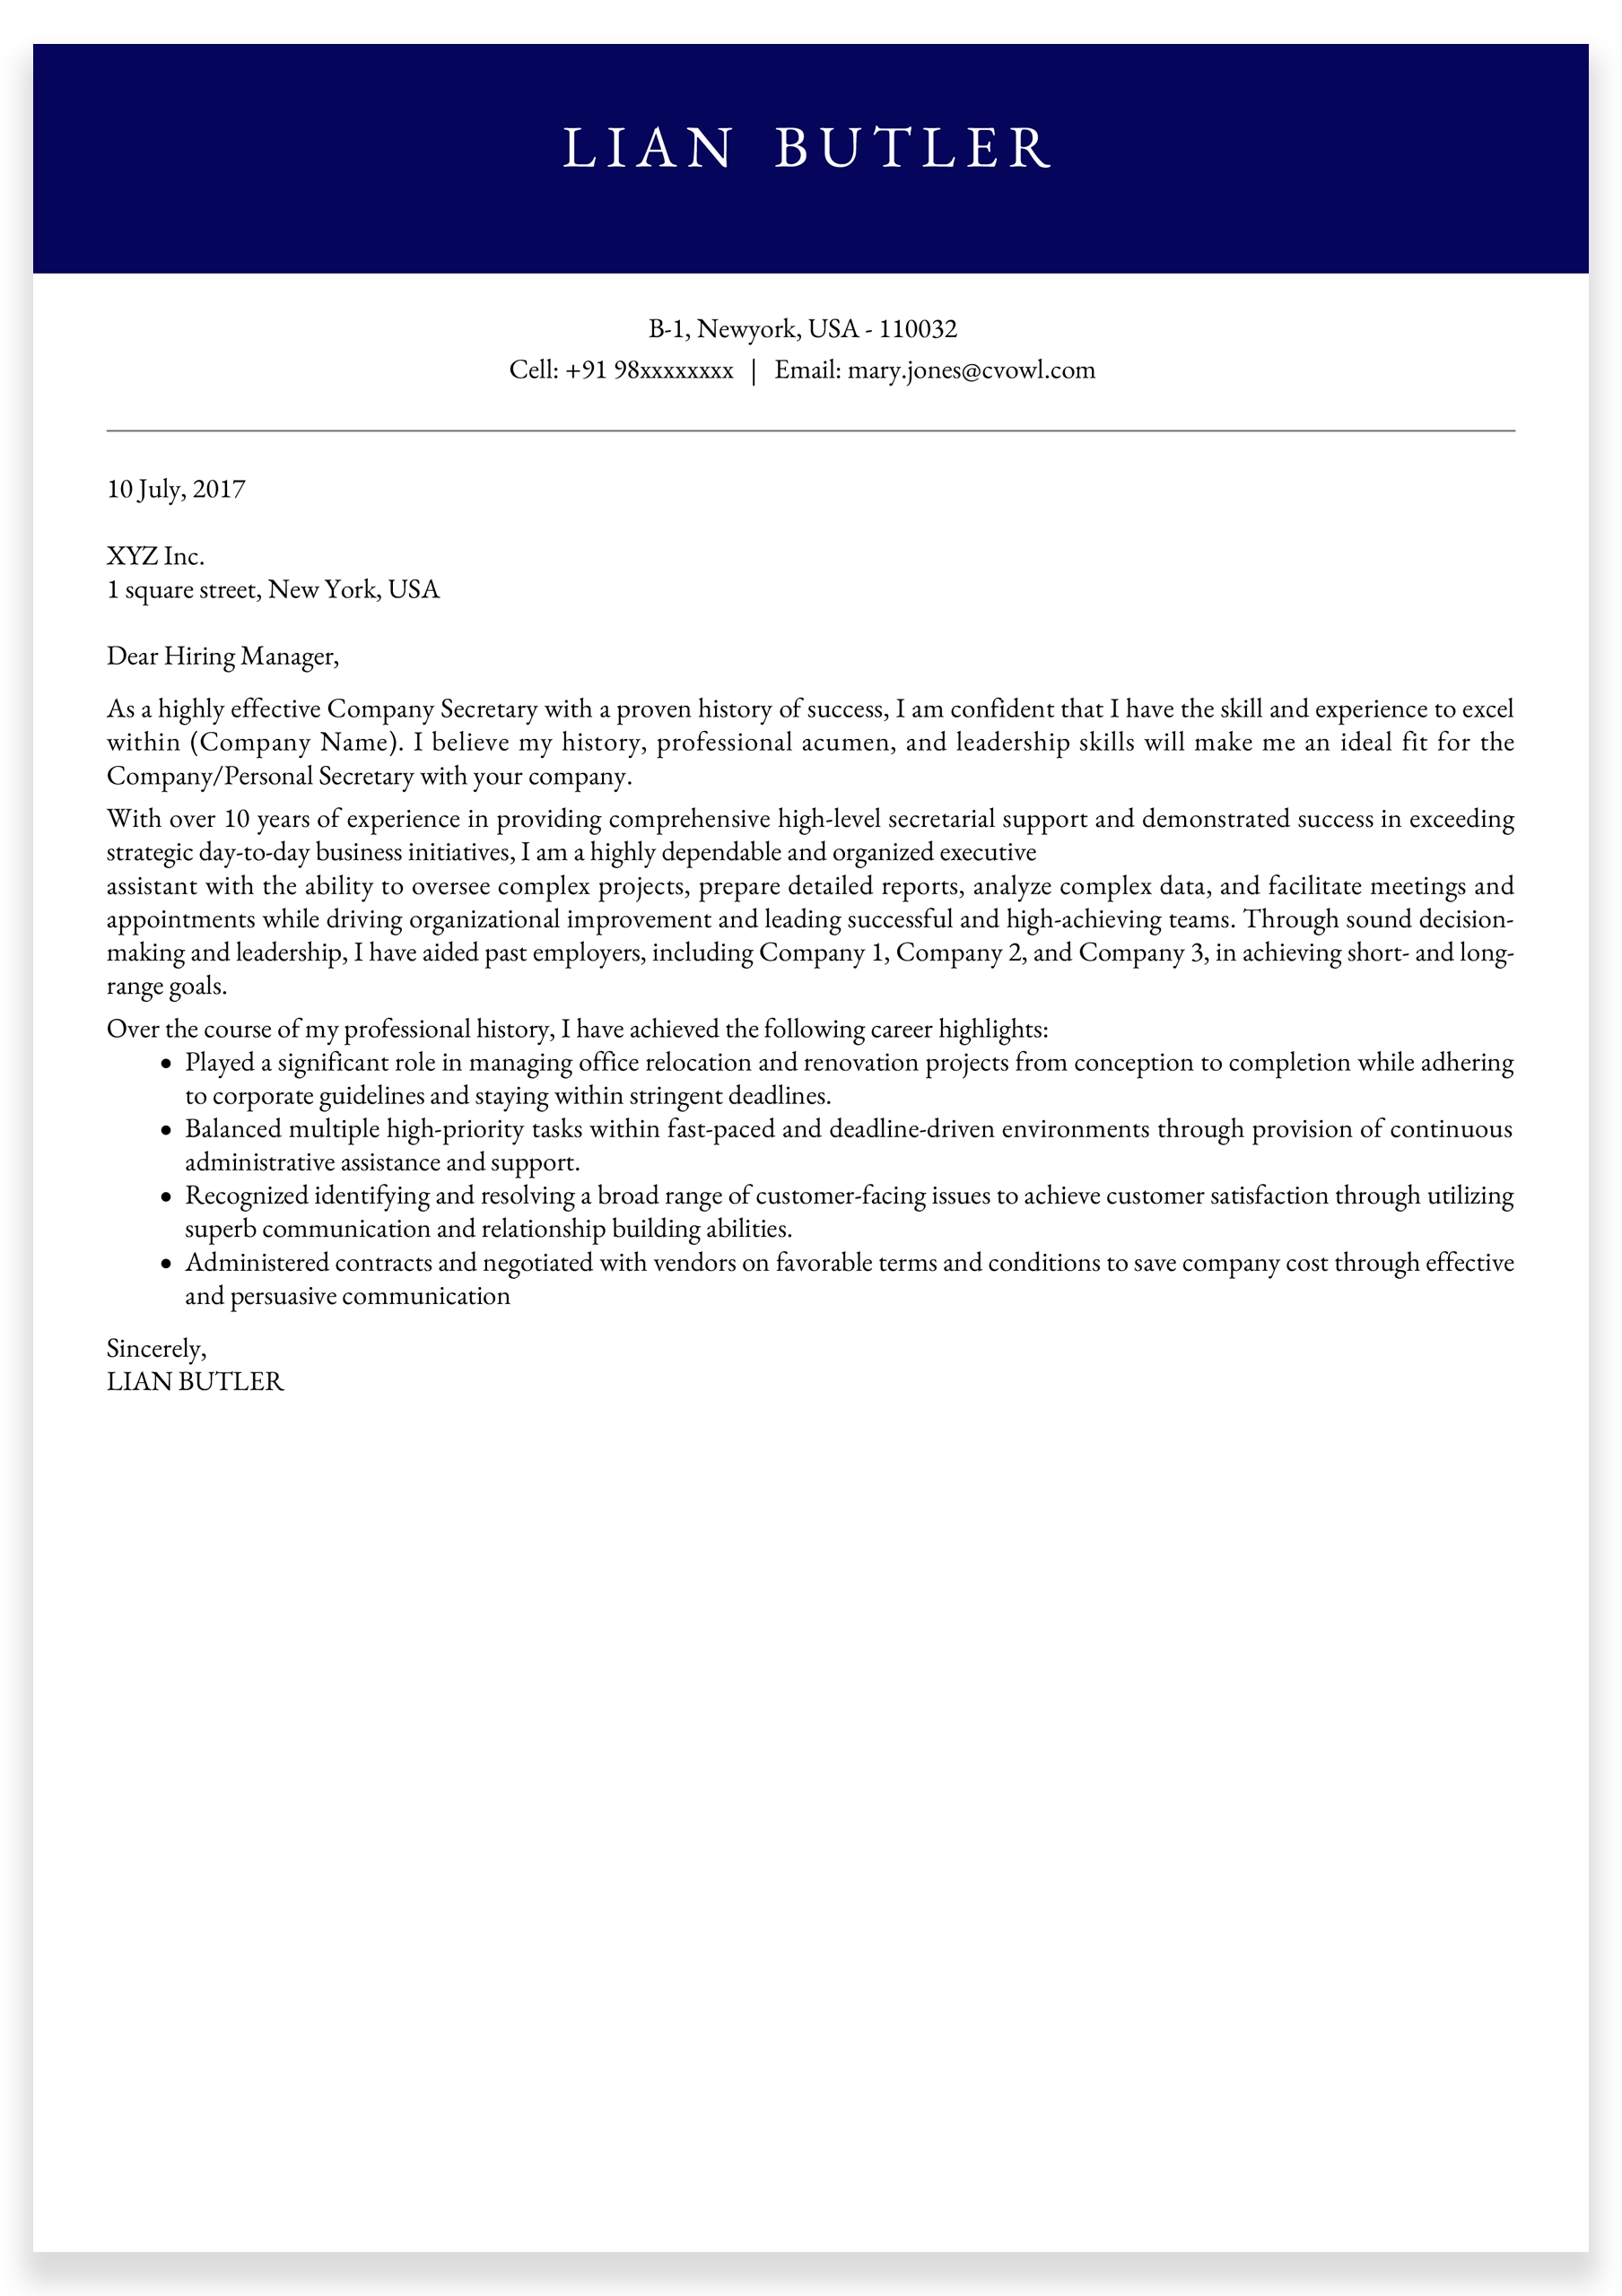 Electrical-Site-Engineer-Cover-Letter-sample8